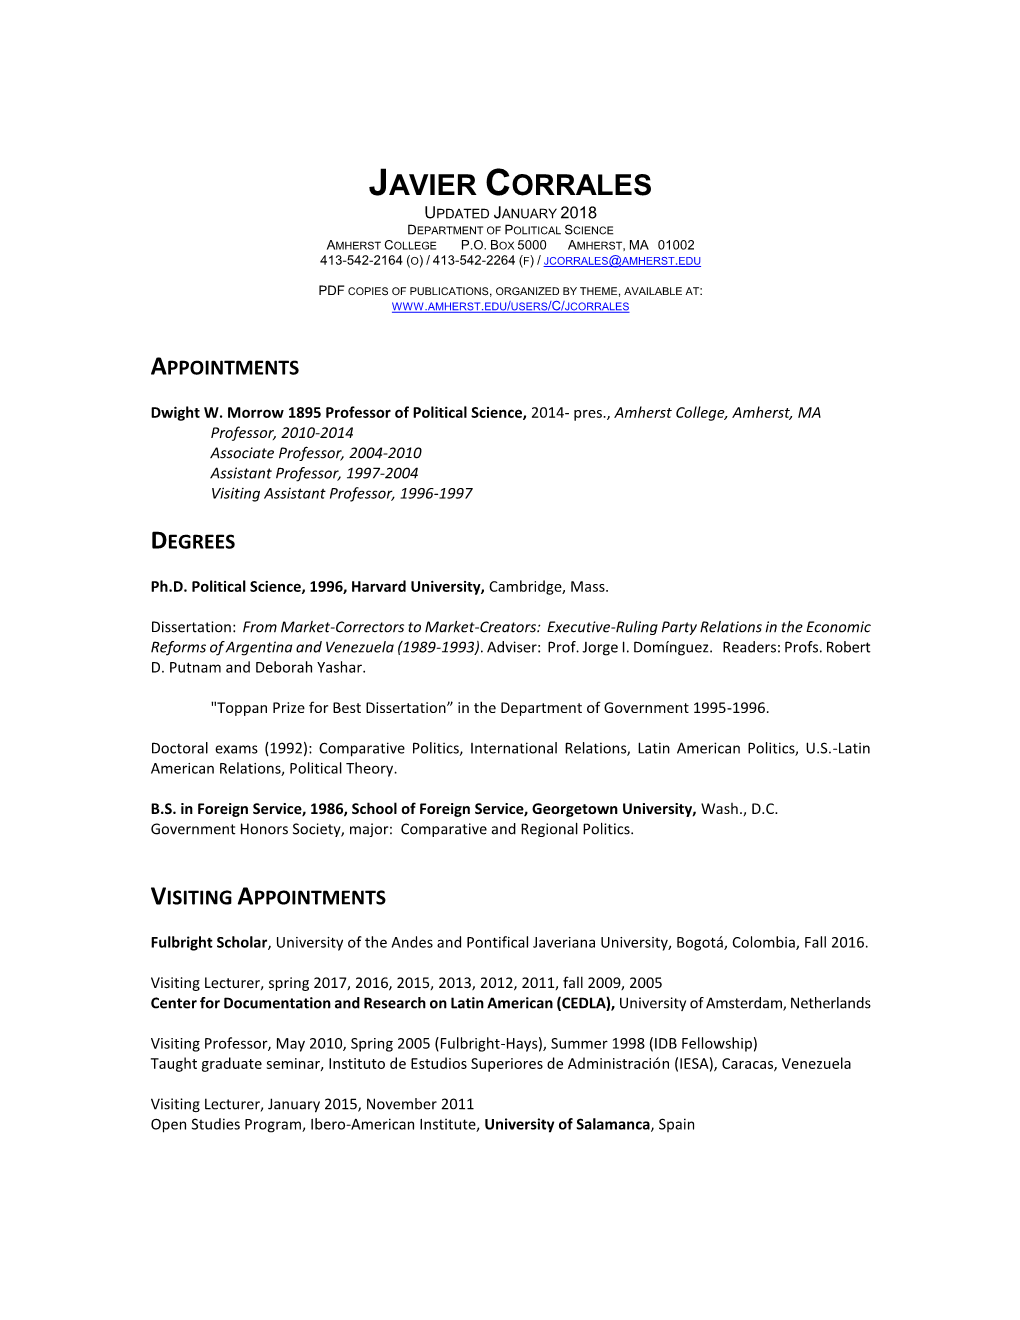 Javier Corrales Updated January 2018 Department of Political Science Amherst College P.O